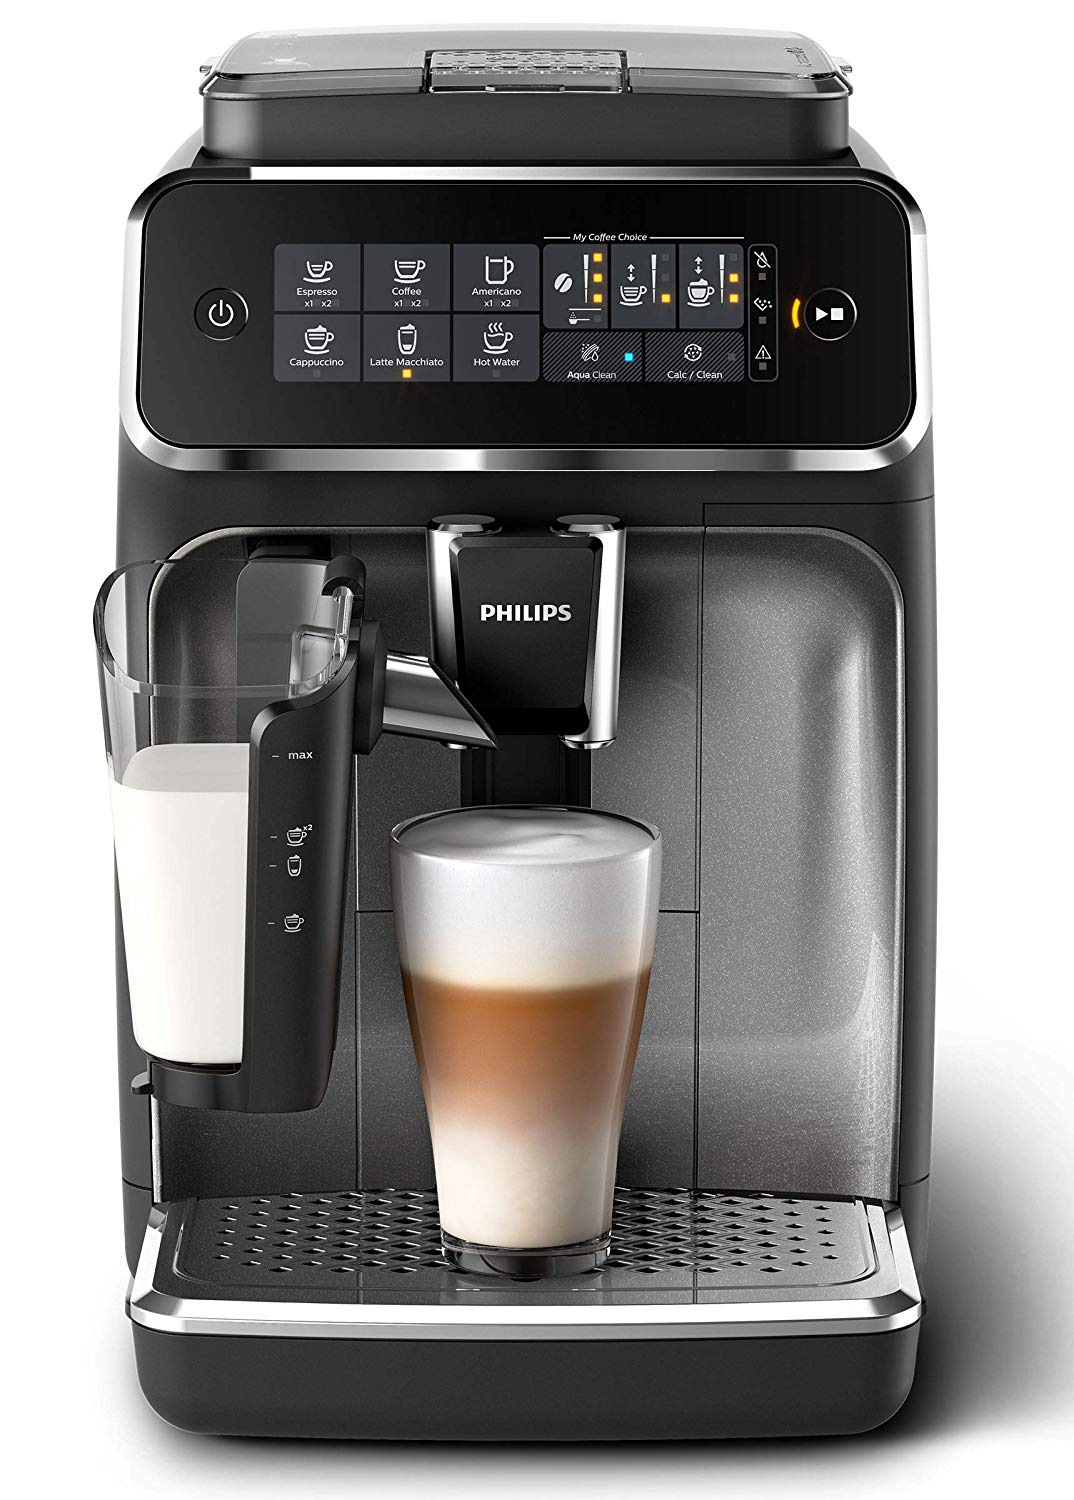 Philips 3200 Series Ep3246 / 70 Fully Automatic Coffee Machine, 5 Specialty